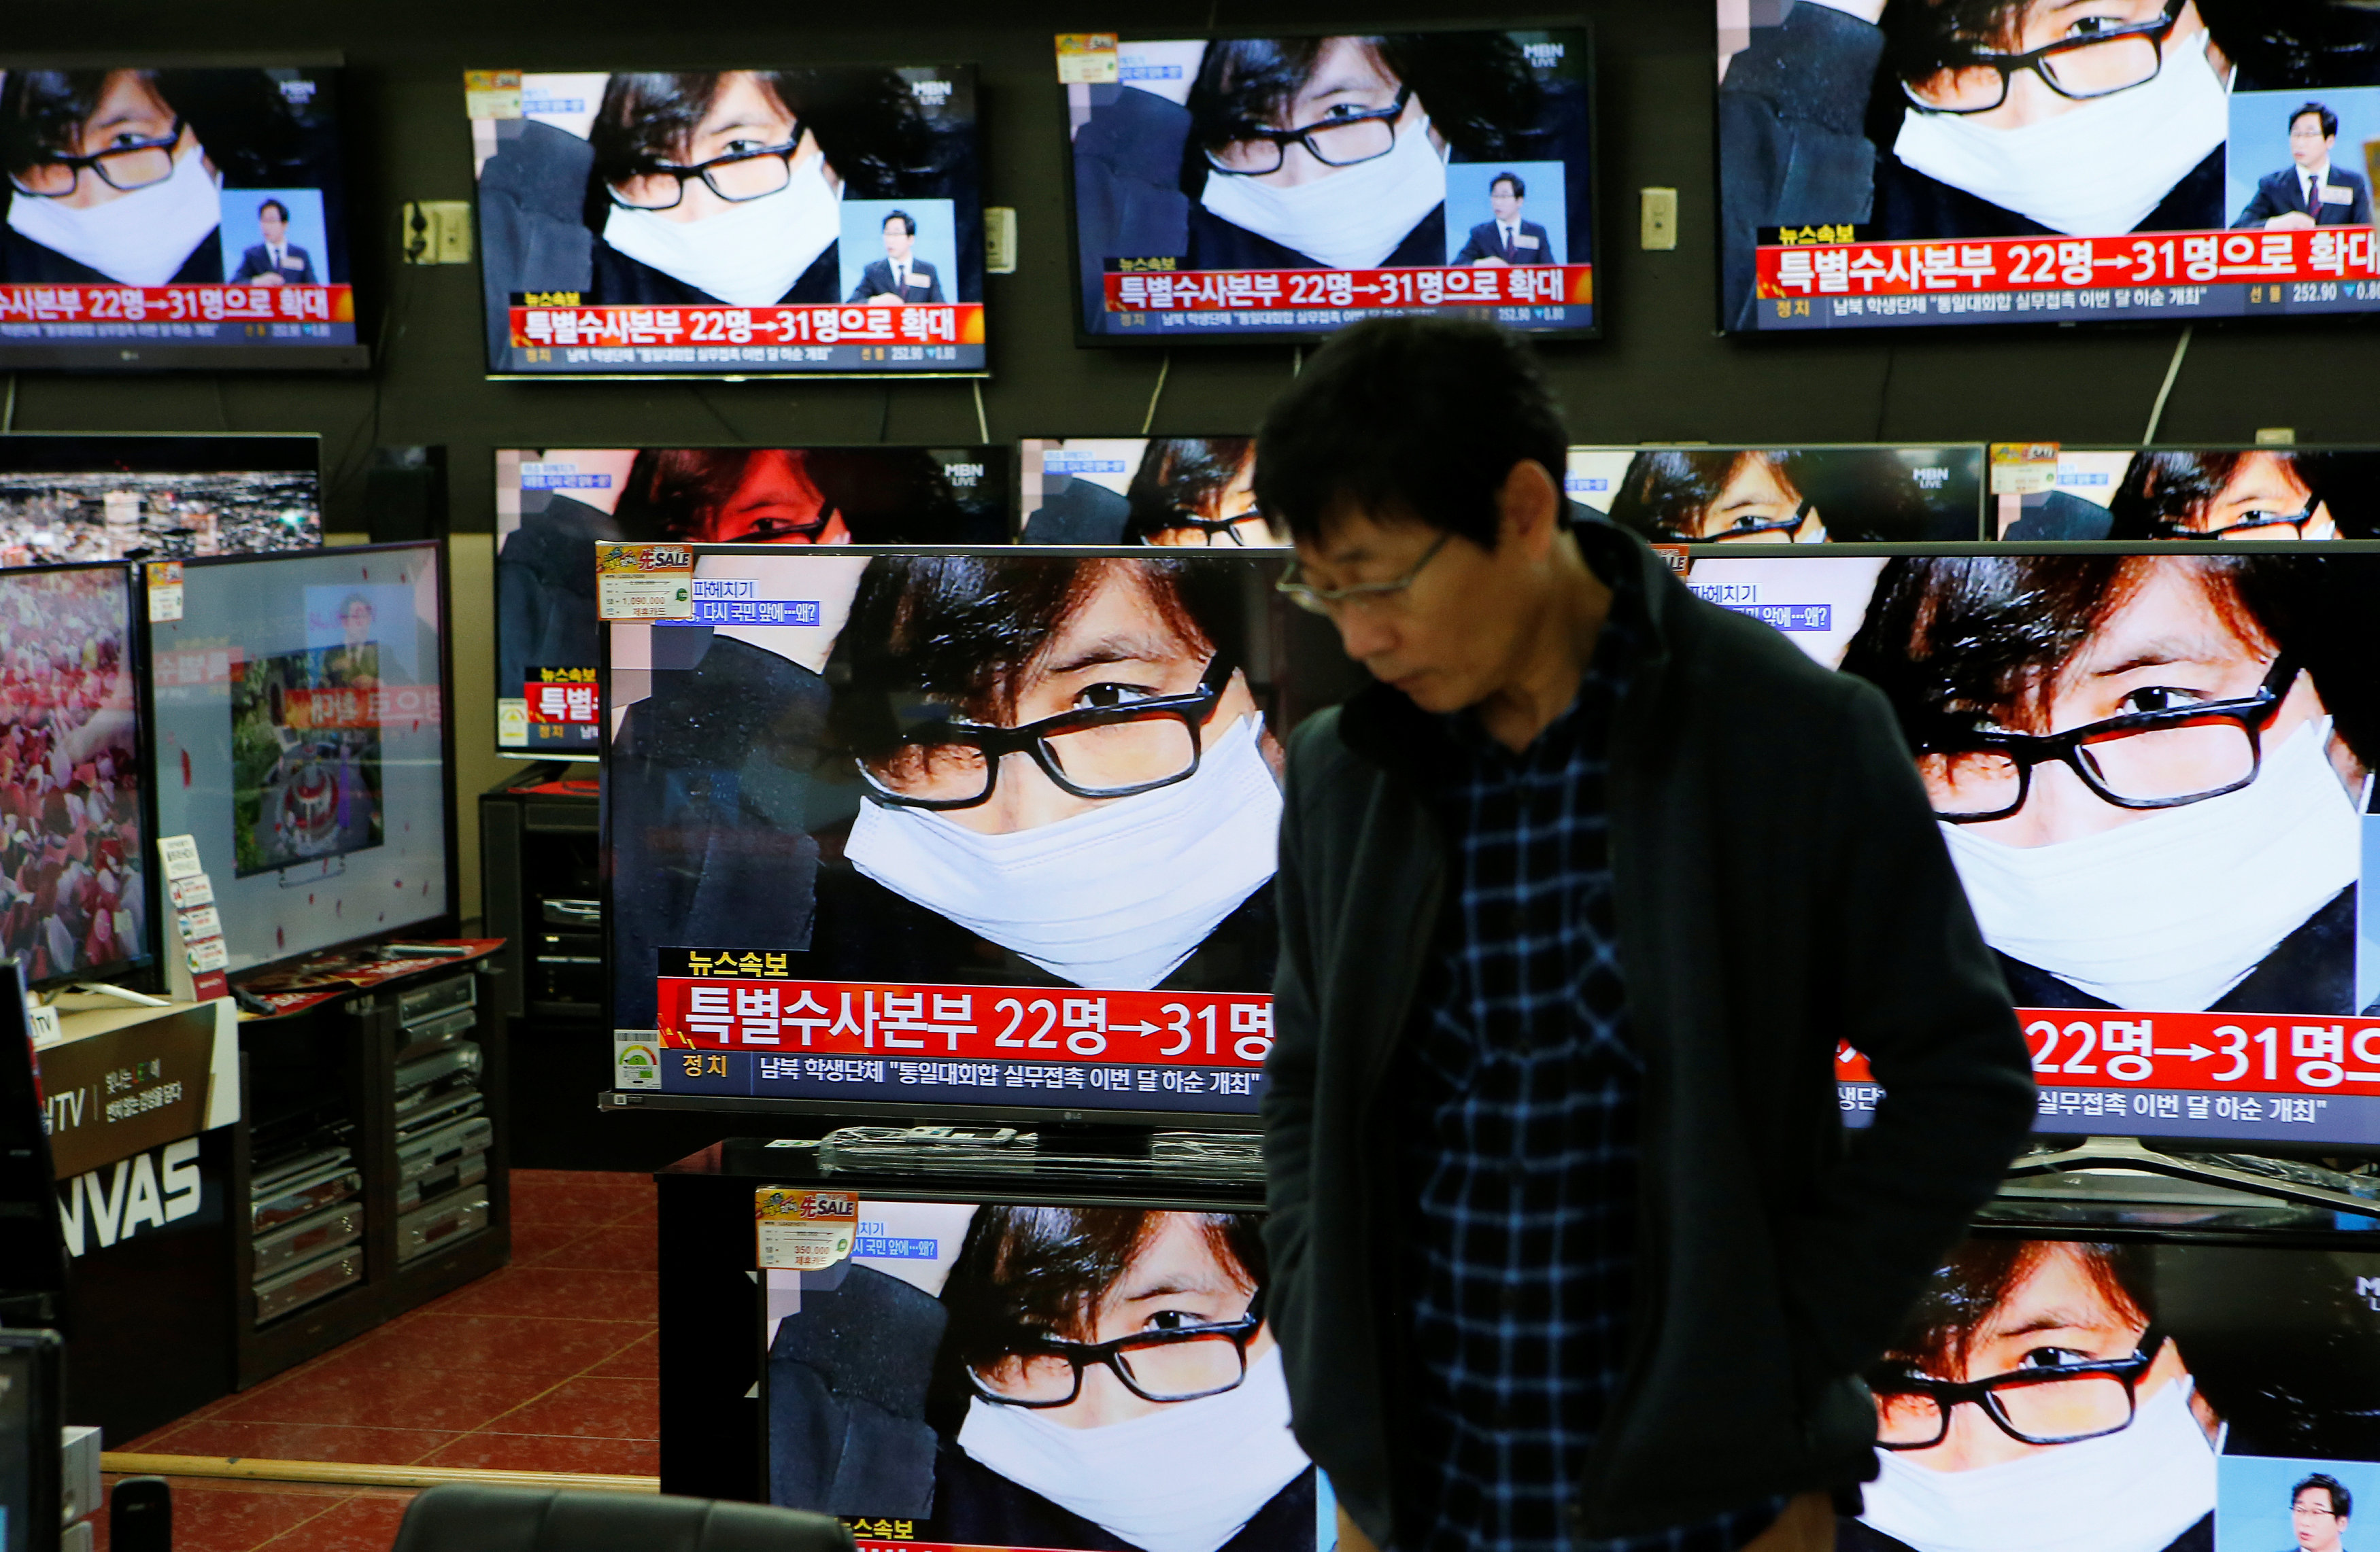 An employee watches TV sets broadcasting a news report on Choi Soon-sil, a long-time friend of South Korean President Park Geun-hye, in Seoul, South Korea, November 4, 2016. REUTERS/Kim Hong-Jin